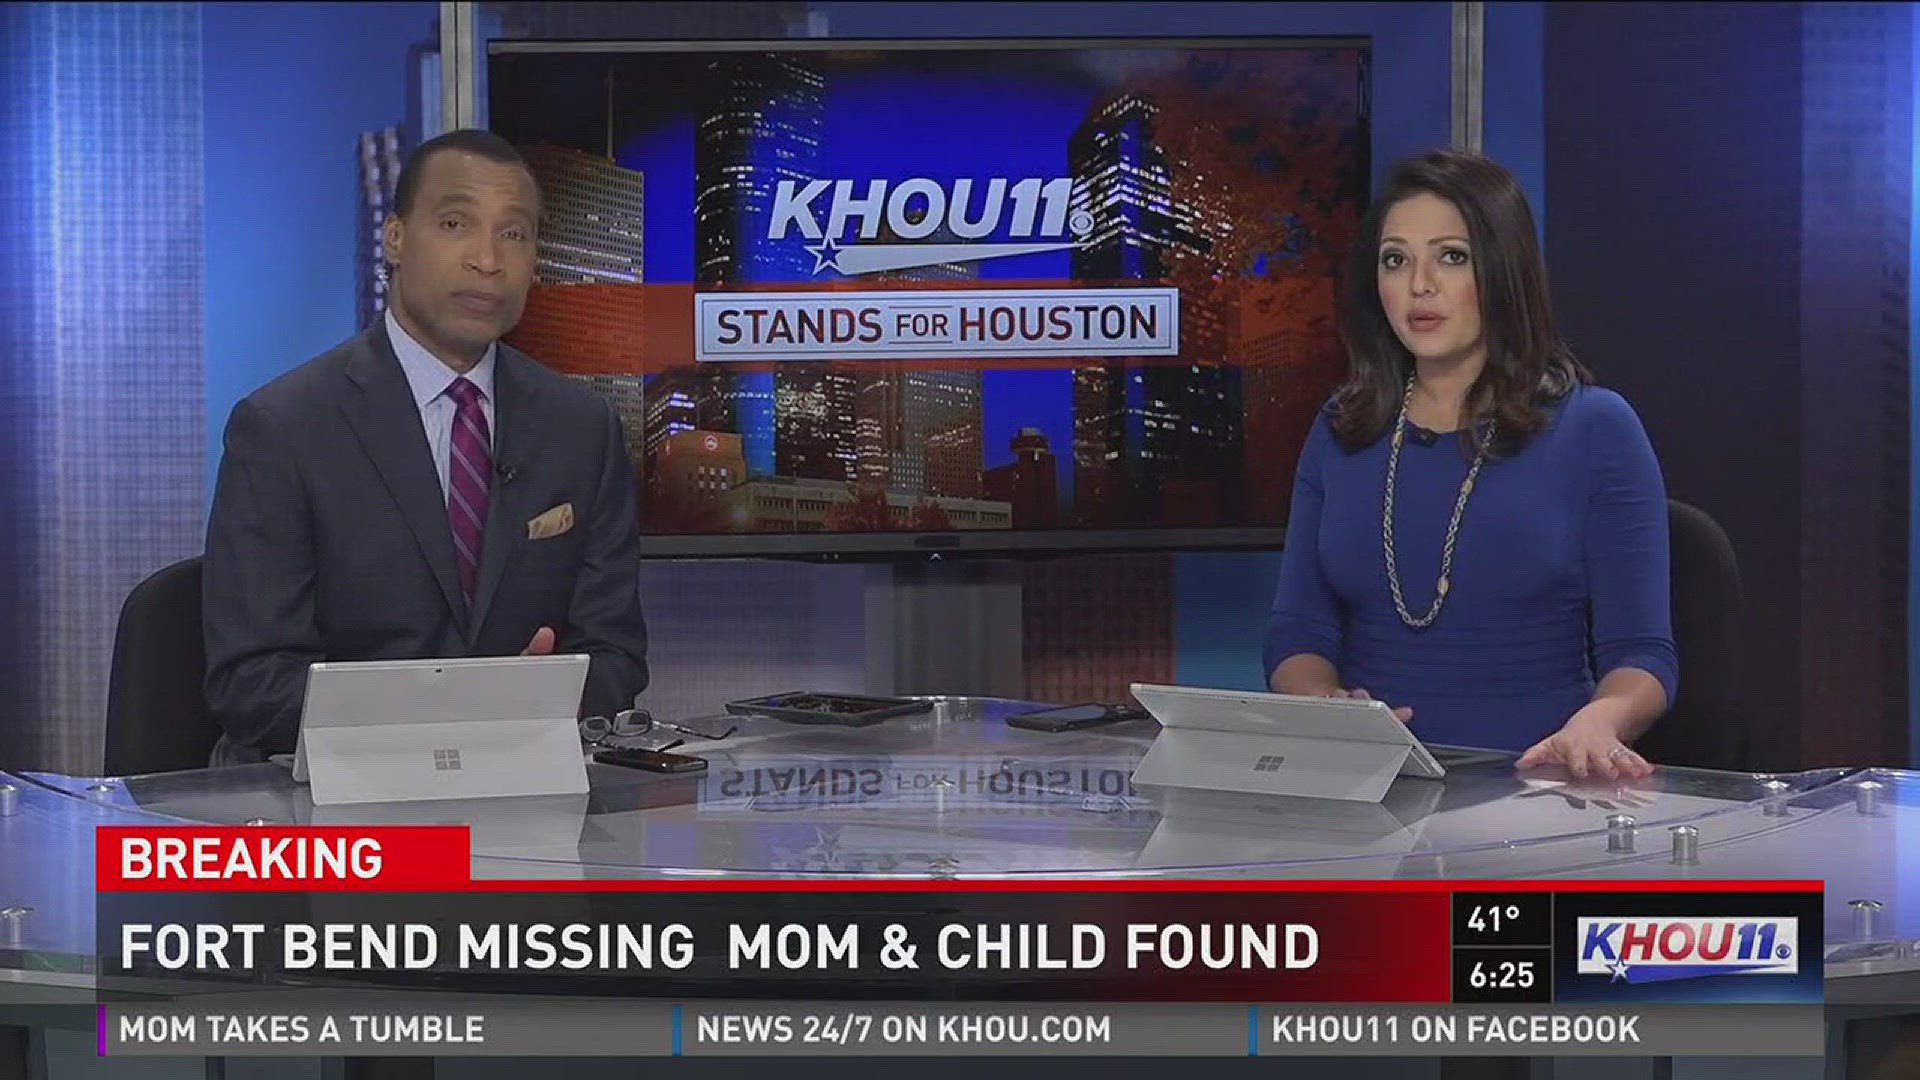 Authorities say a missing woman and her 2-year-old daughter have been found safe.